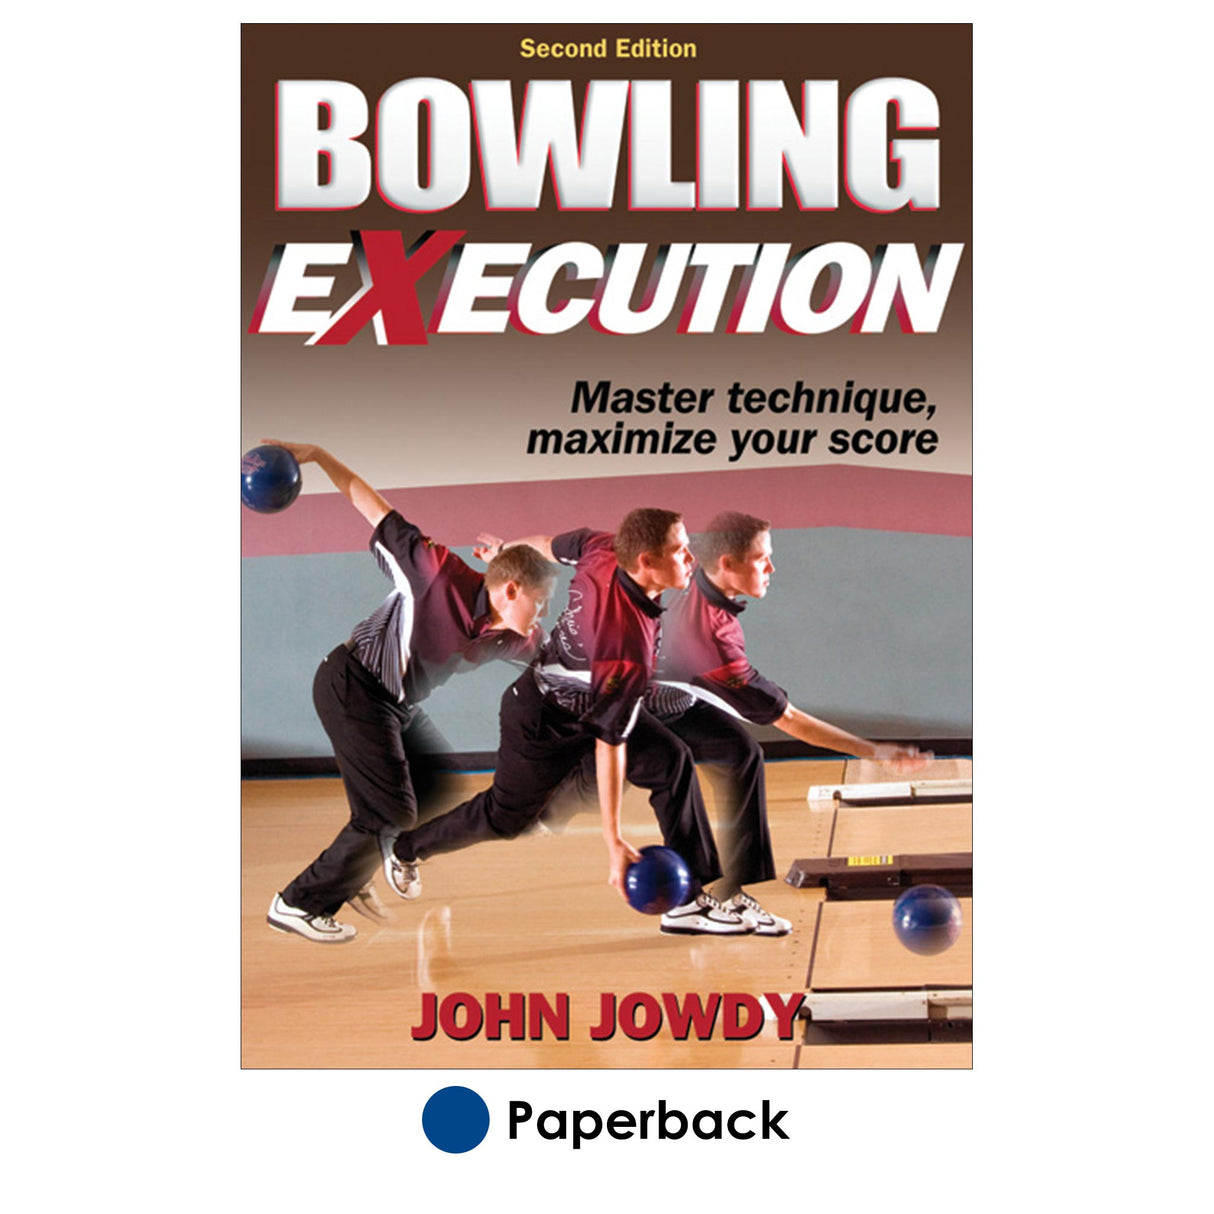 Bowling eXecution-2nd Edition